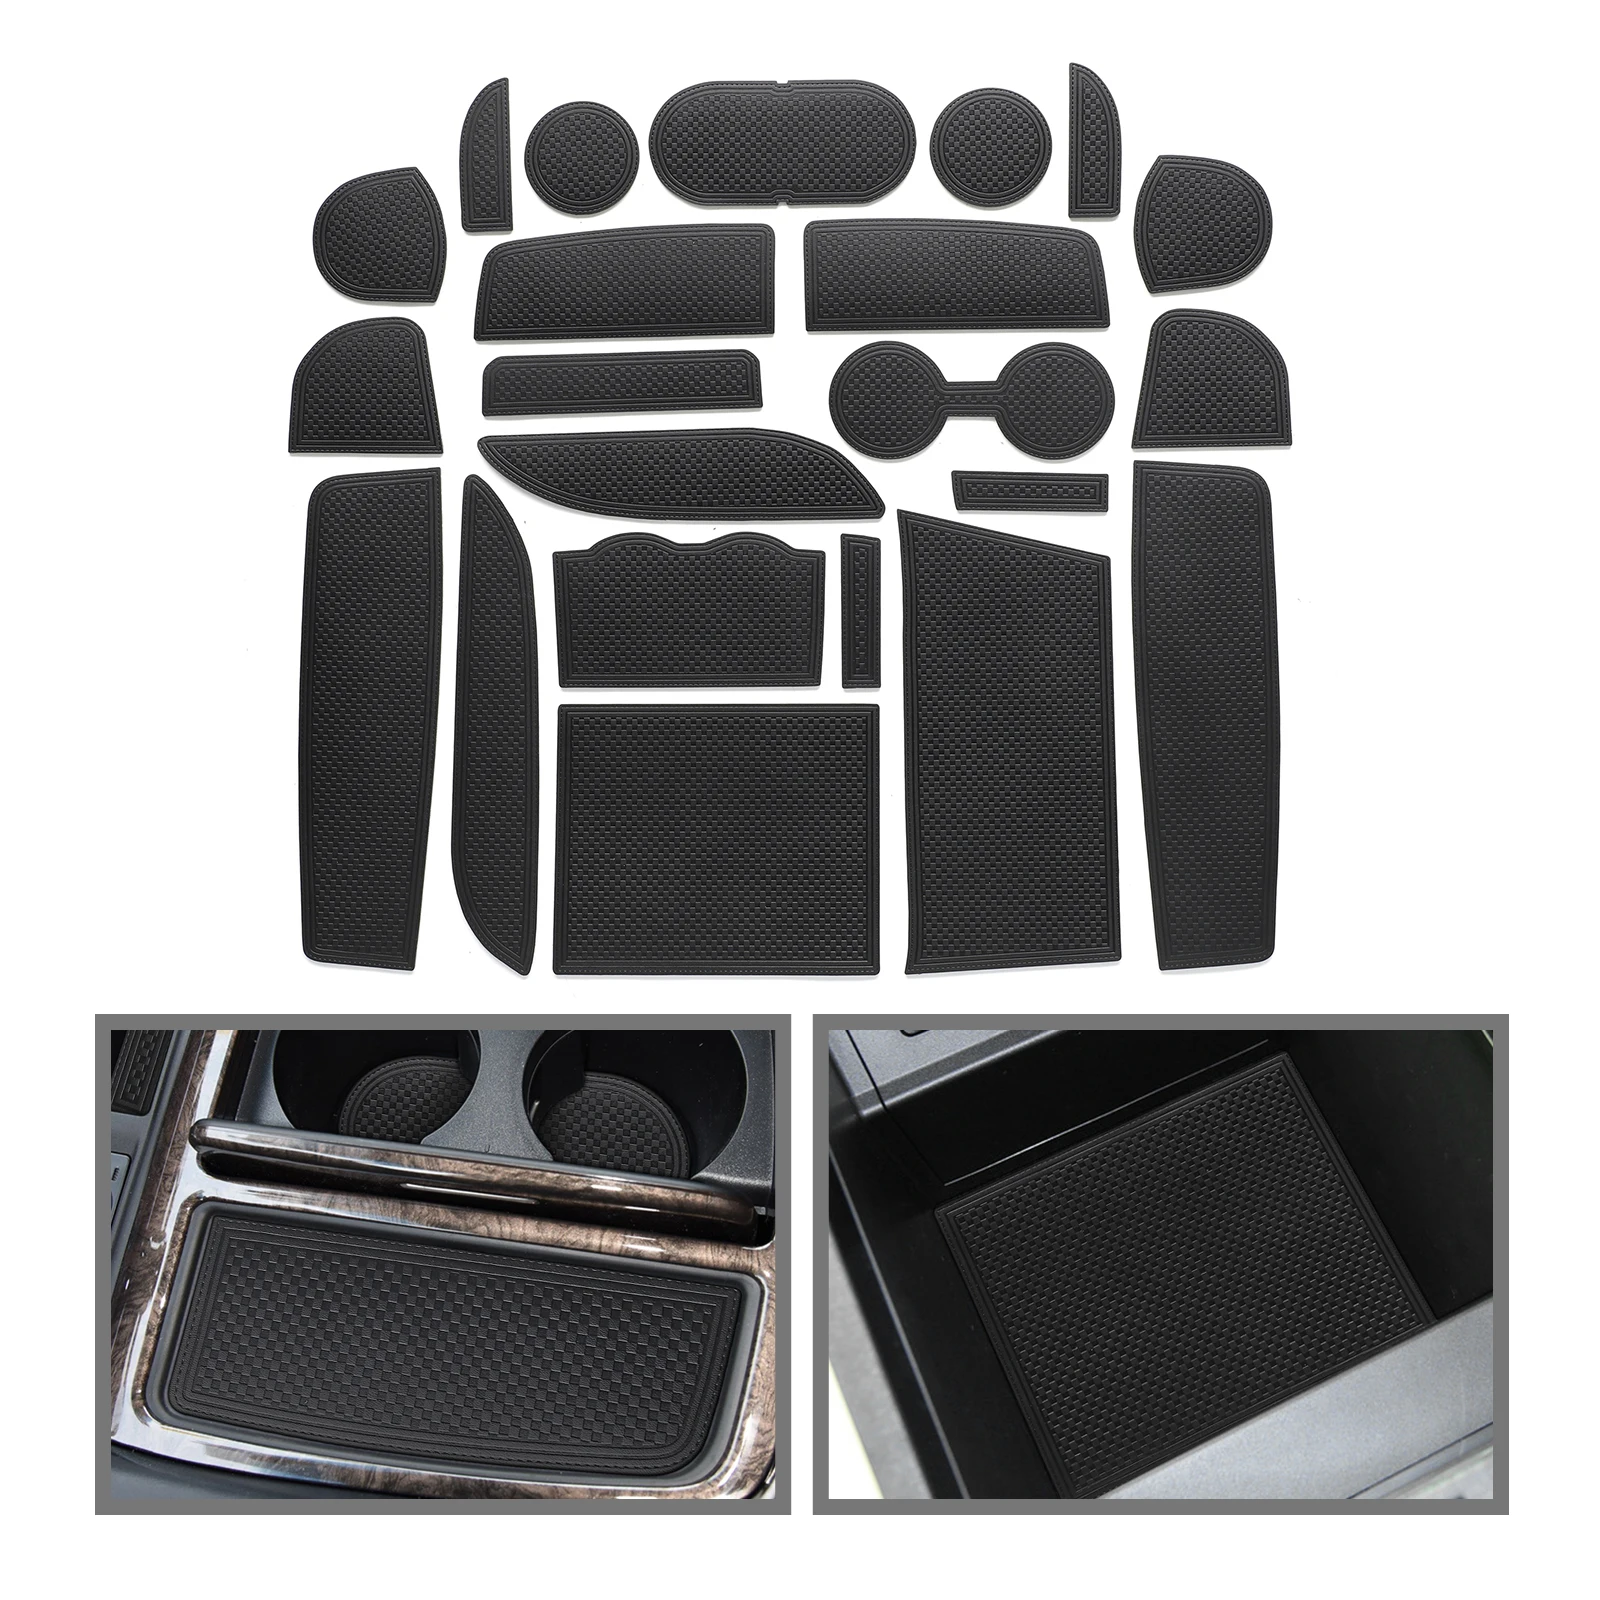 

Car Leather Gate Slot Cup Mat for Toyota Alphard Vellfire AH30 Cortex Door Pad Water Coaster Accessories